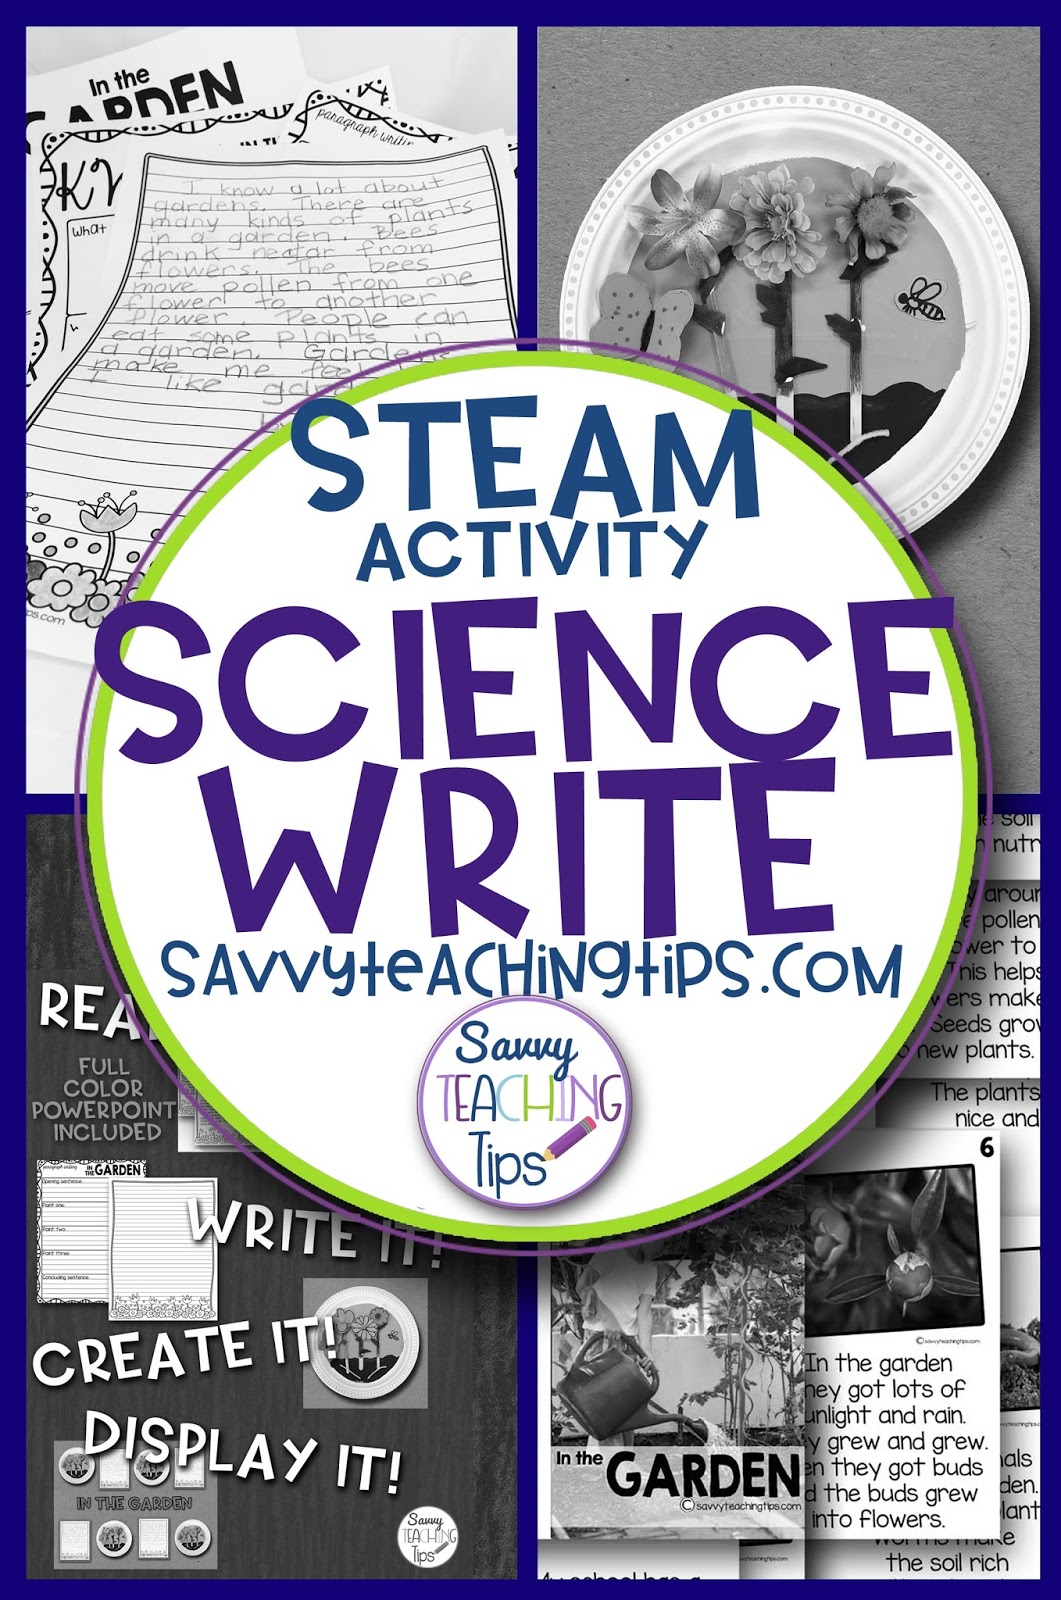 STEAM.  A fantastic bulletin board idea.  A detailed life science lesson that integrates ELA, Science and Art and looks great.  The parents will think you are a fantastic teacher.